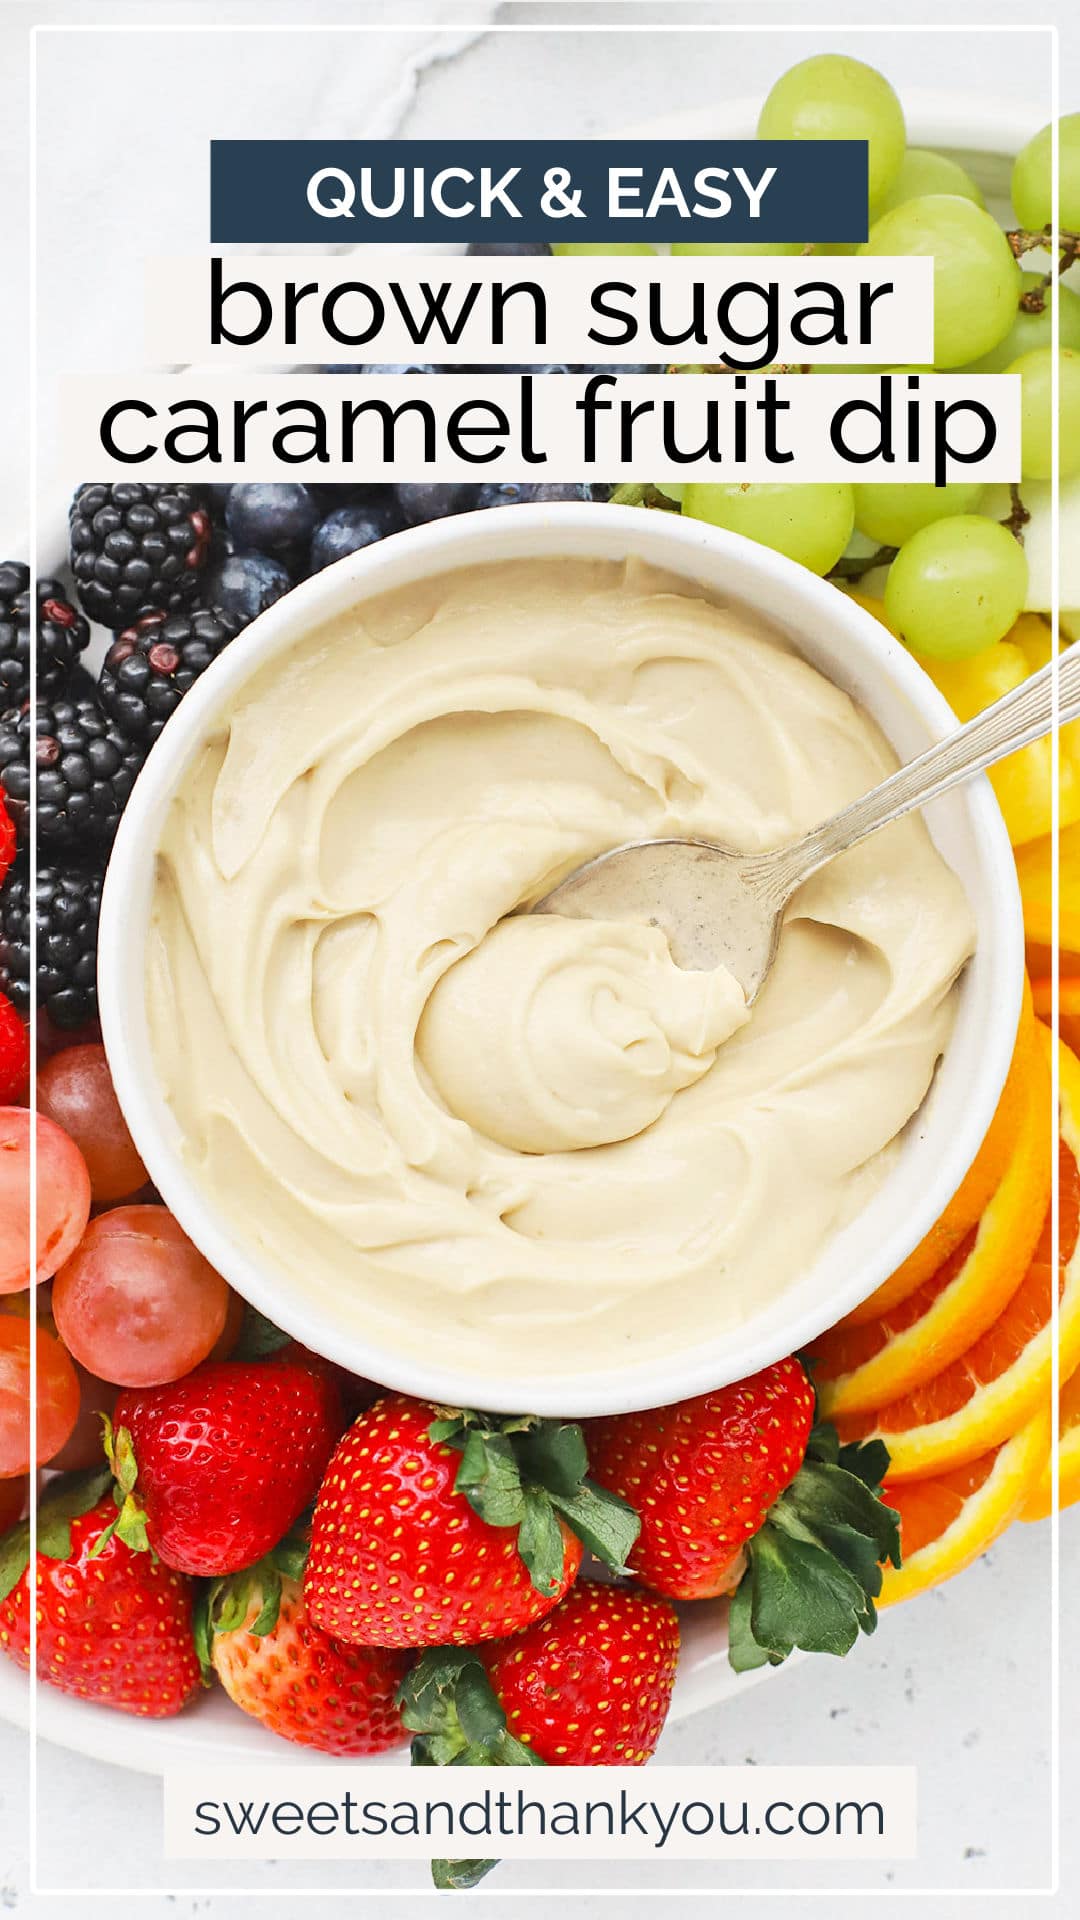 Brown Sugar Cream Cheese Fruit Dip - This easy brown sugar fruit dip recipe only takes 5 ingredients and less than 5 minutes to make. It makes every occasion a little more delicious! // Cream Cheese Fruit Dip Recipe // brown sugar dip // caramel cream cheese fruit dip // party fruit dip // fruit tray // gluten free fruit dip // fruit dip without yogurt // fruit dip without sour cream // caramel brown sugar fruit dip